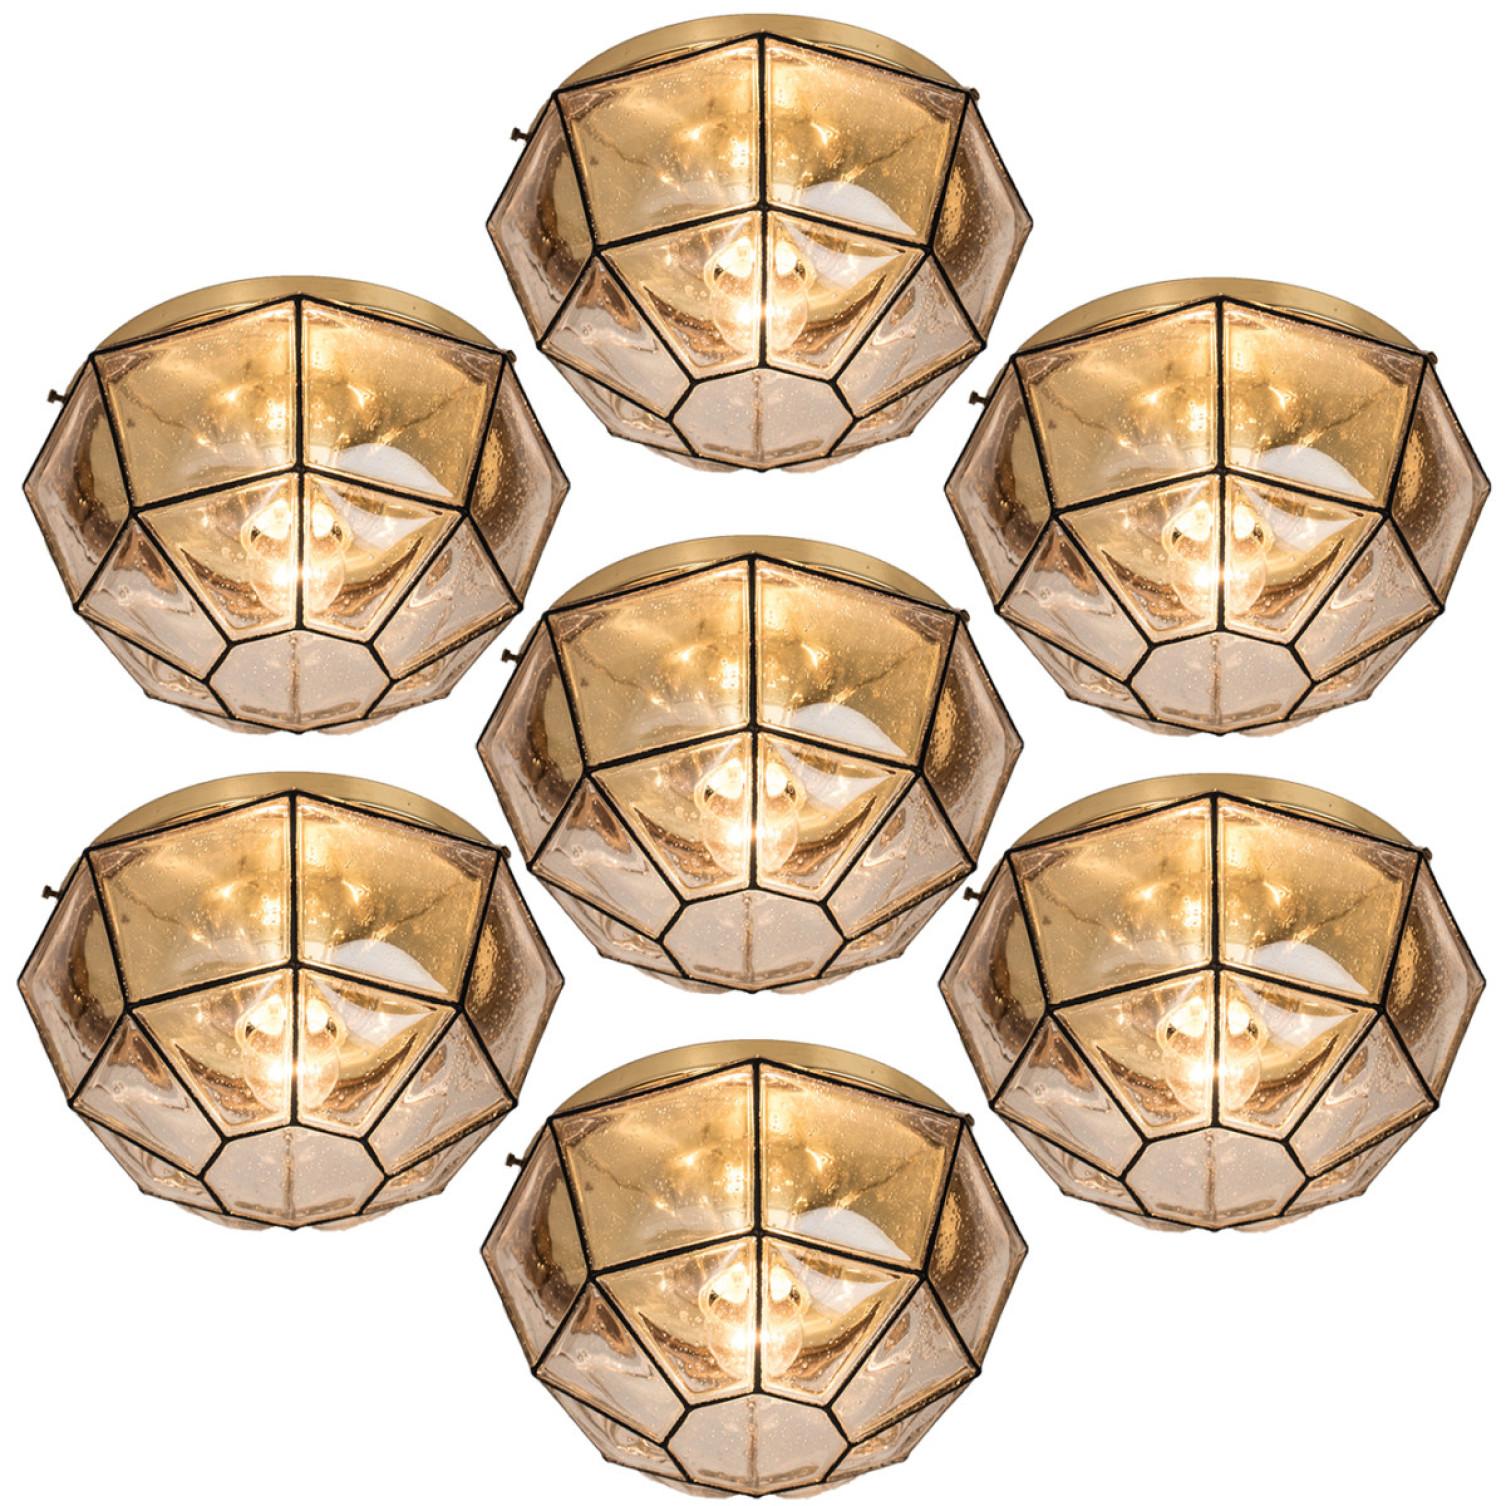 This beautiful and unique octagonal set of iron and glass light flush mounts or wall lights were manufactured by Glashütte Limburg in Germany during the 1960s (late 1960s or early 1970s). Nice craftsmanship. Elaborate clear bubble glass which bulges